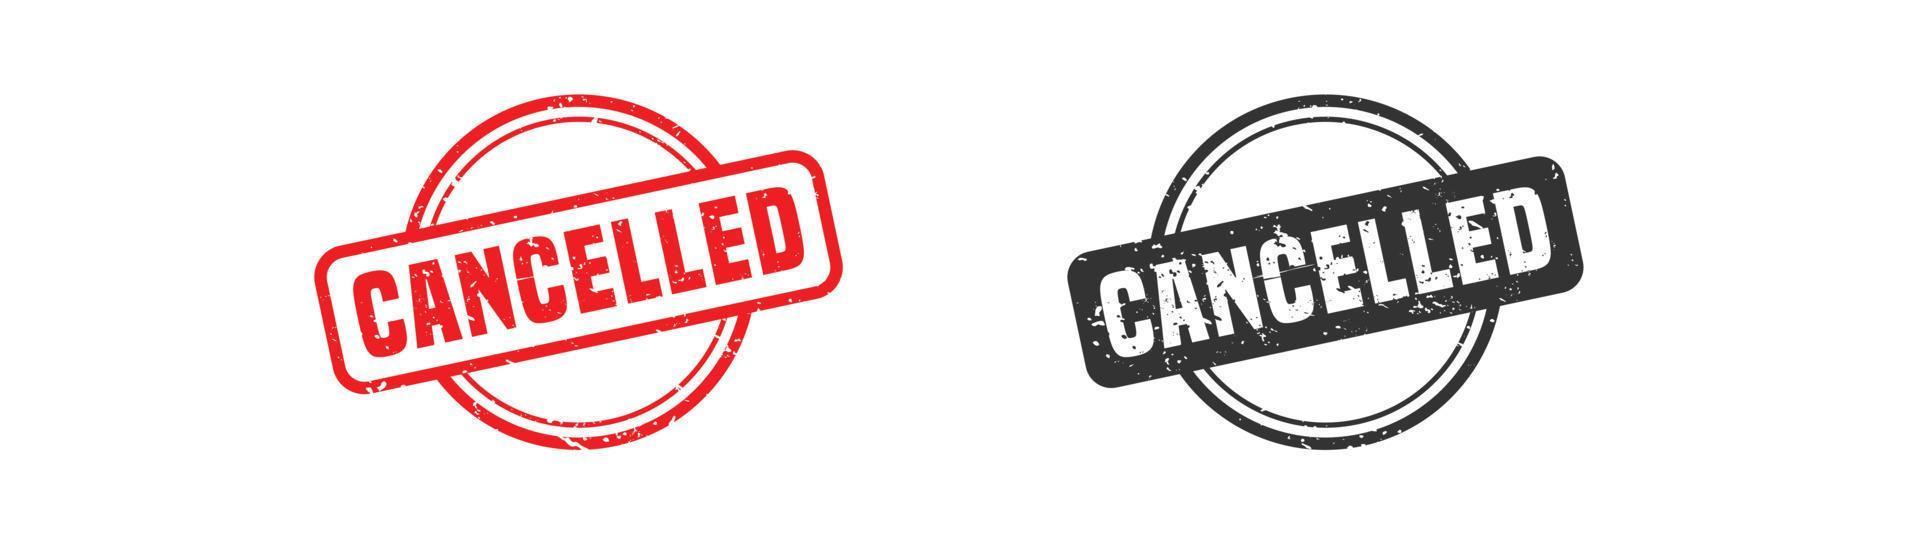 Cancelled stamp rubber with grunge style on white background. vector